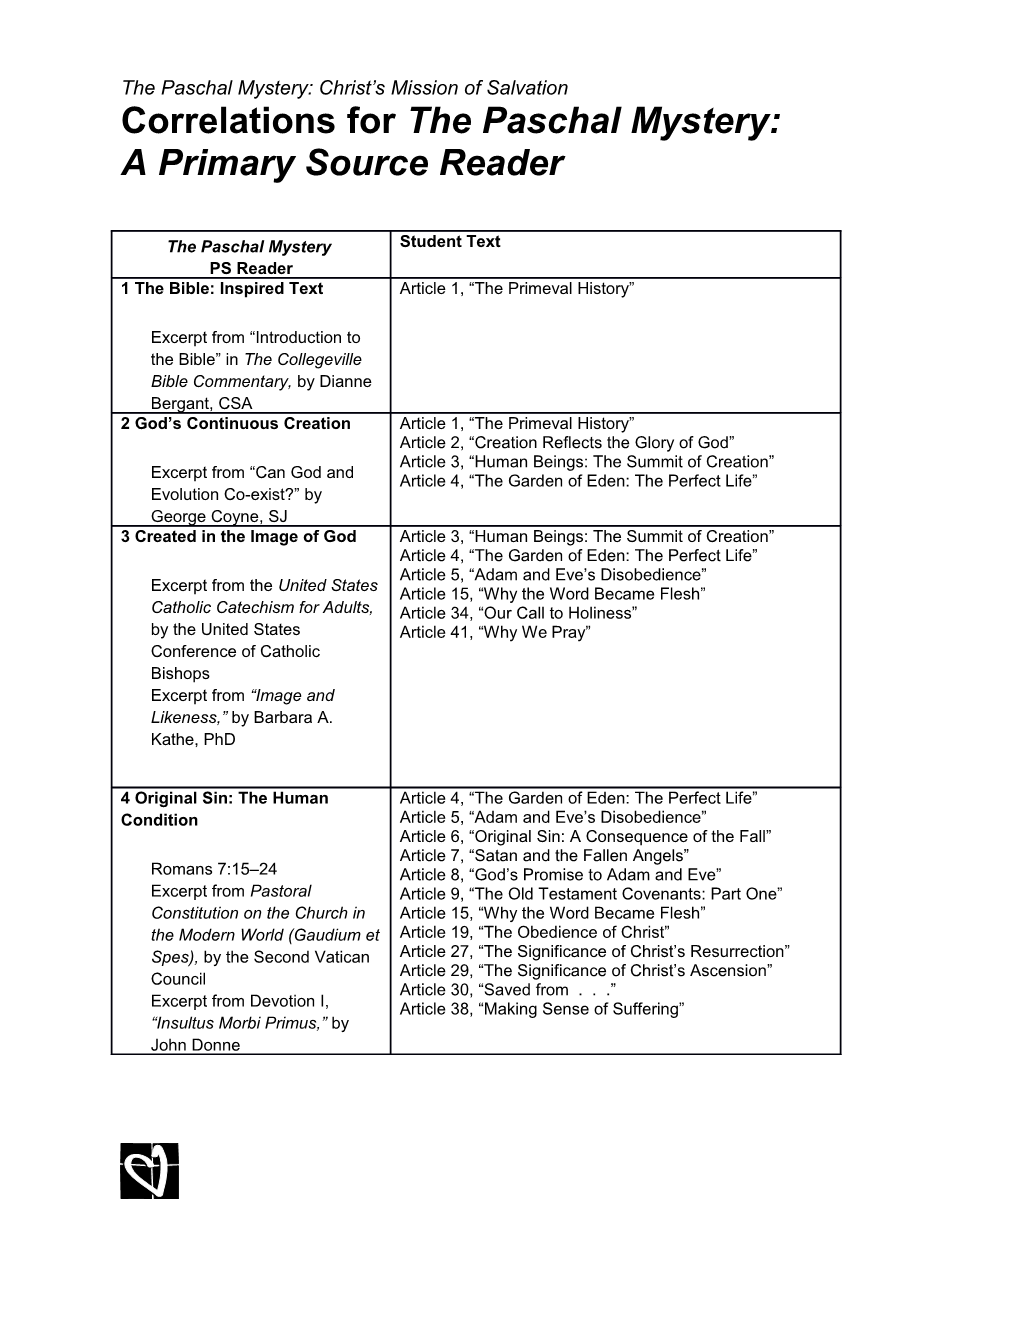 Correlations for the Paschal Mystery: a Primary Source Reader Page 1